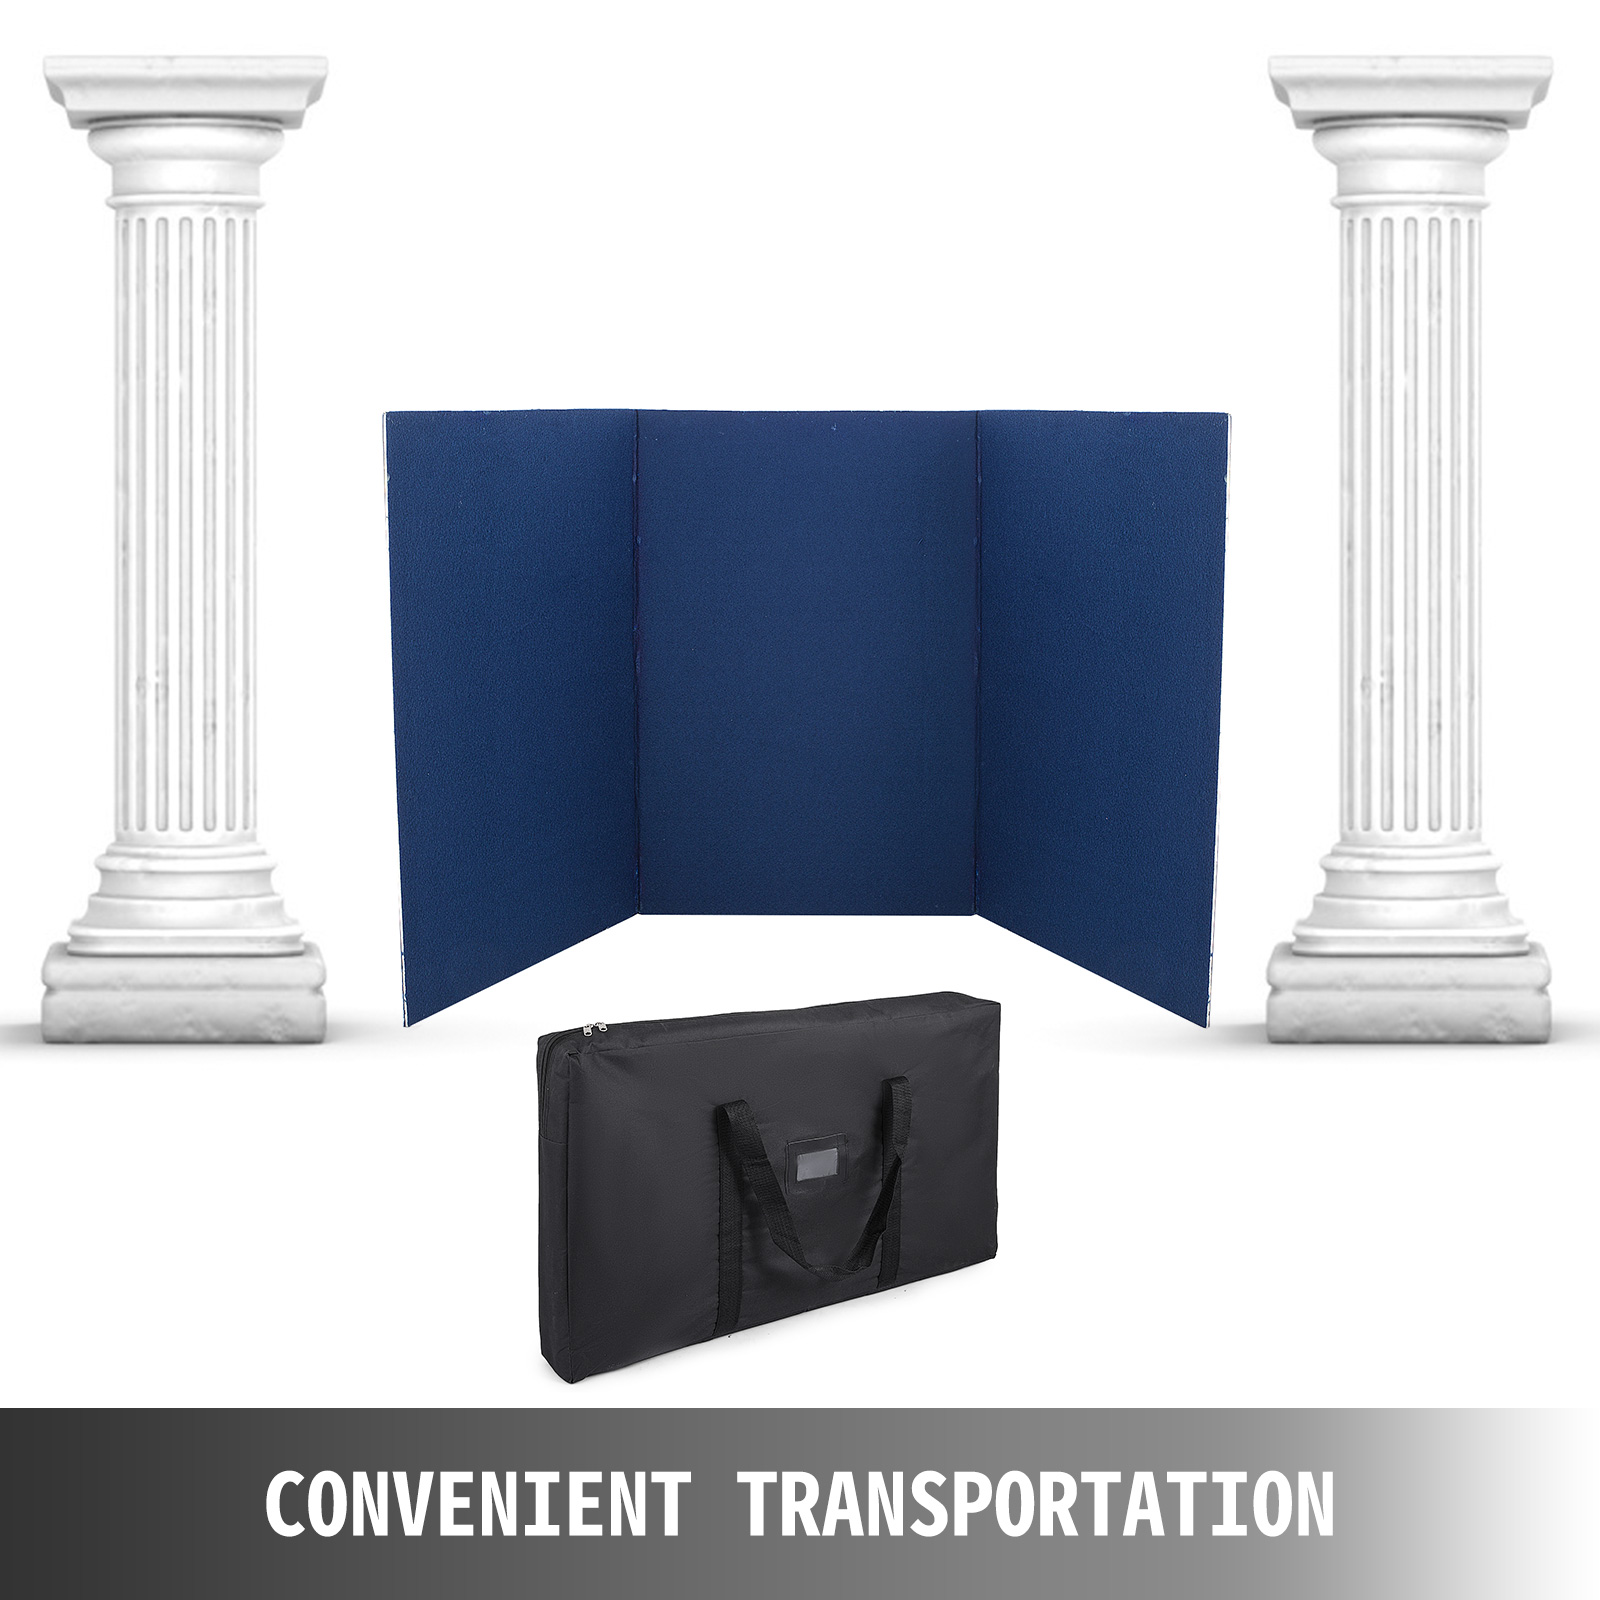 3 Panel Presentation Board, Lightweight and Portable, Hook & Loop-Receptive  Blue Fabric, Carrying Bag Included, 72 x 36-Inch (3PTTBLUE)